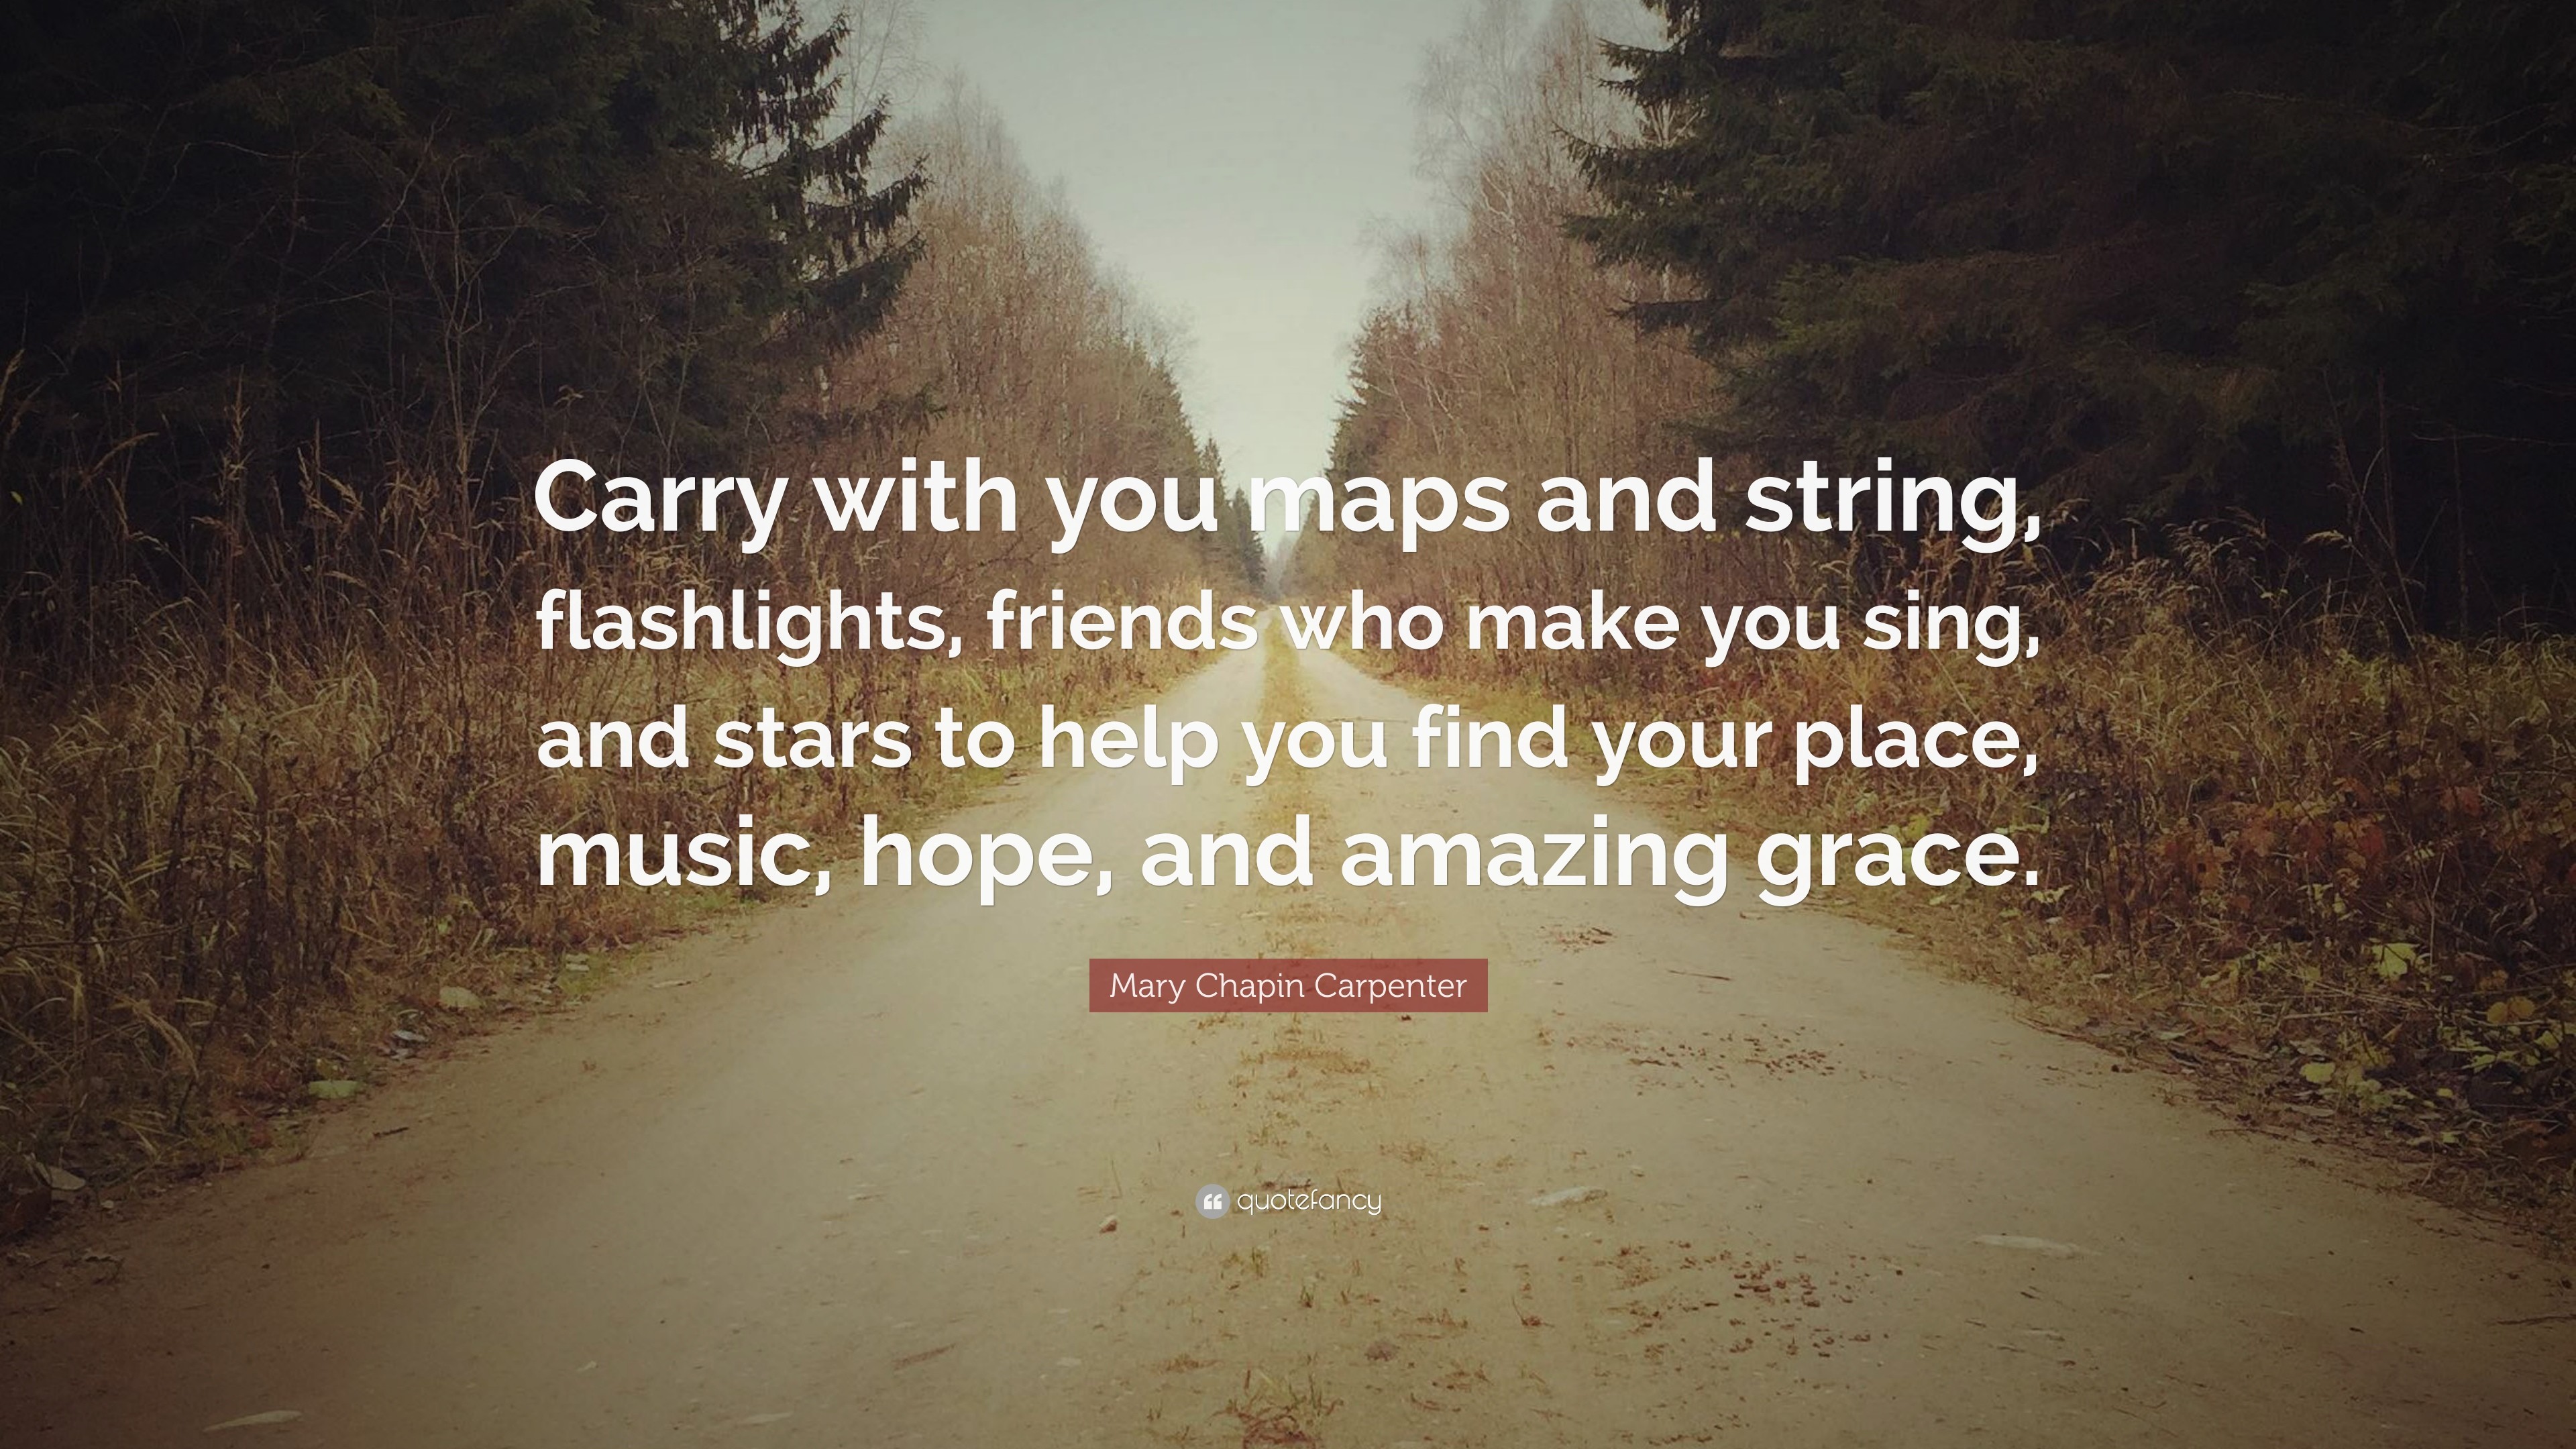 3840x2160 Mary Chapin Carpenter Quote: “Carry with you maps and string, flashlights,  friends